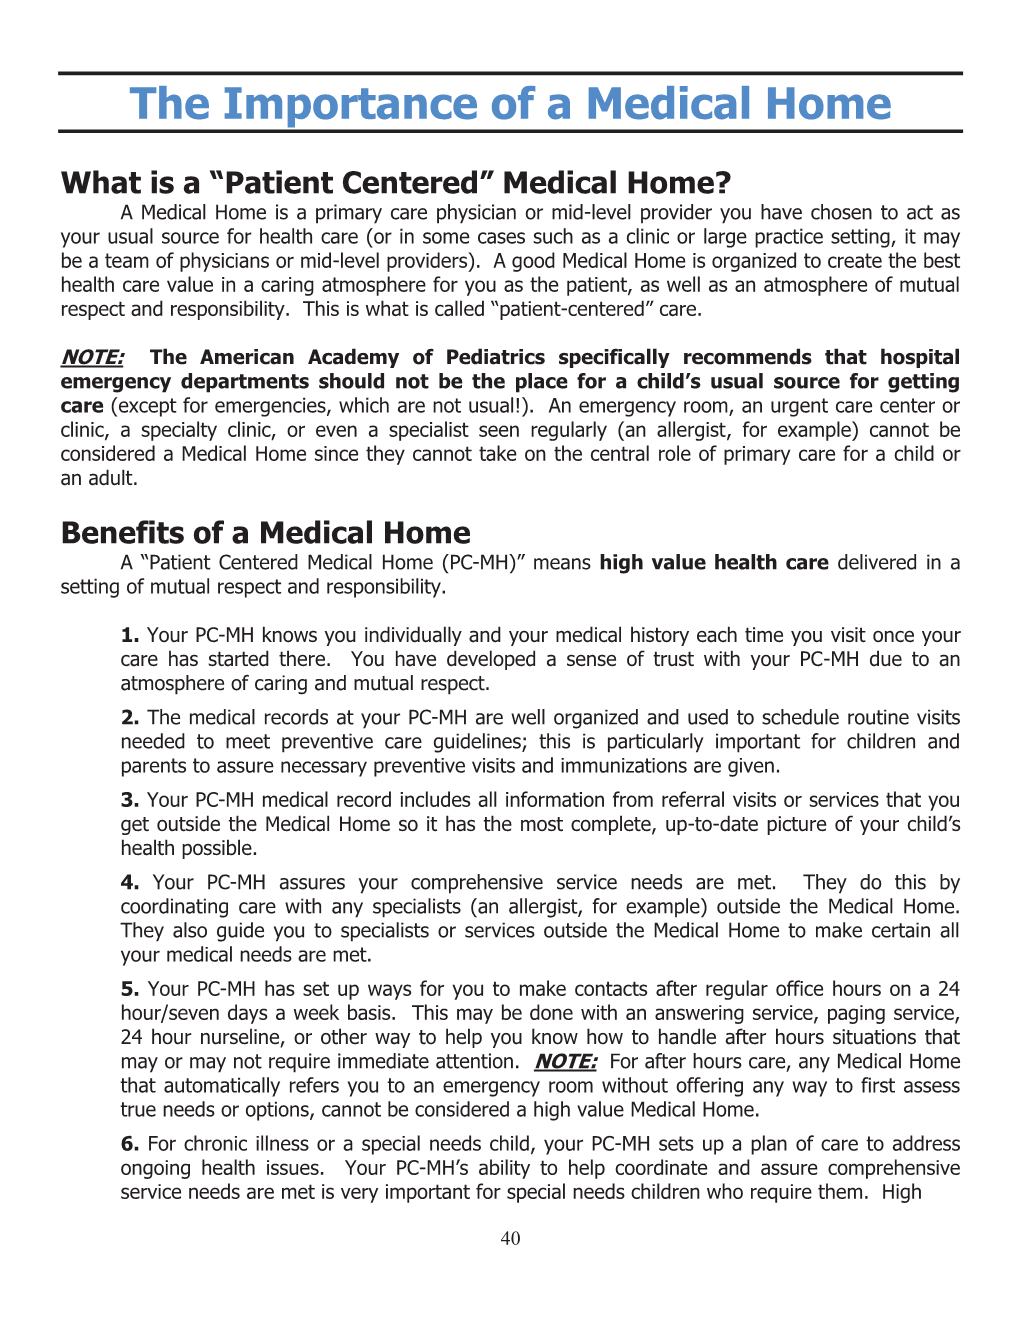 The Importance of a Medical Home